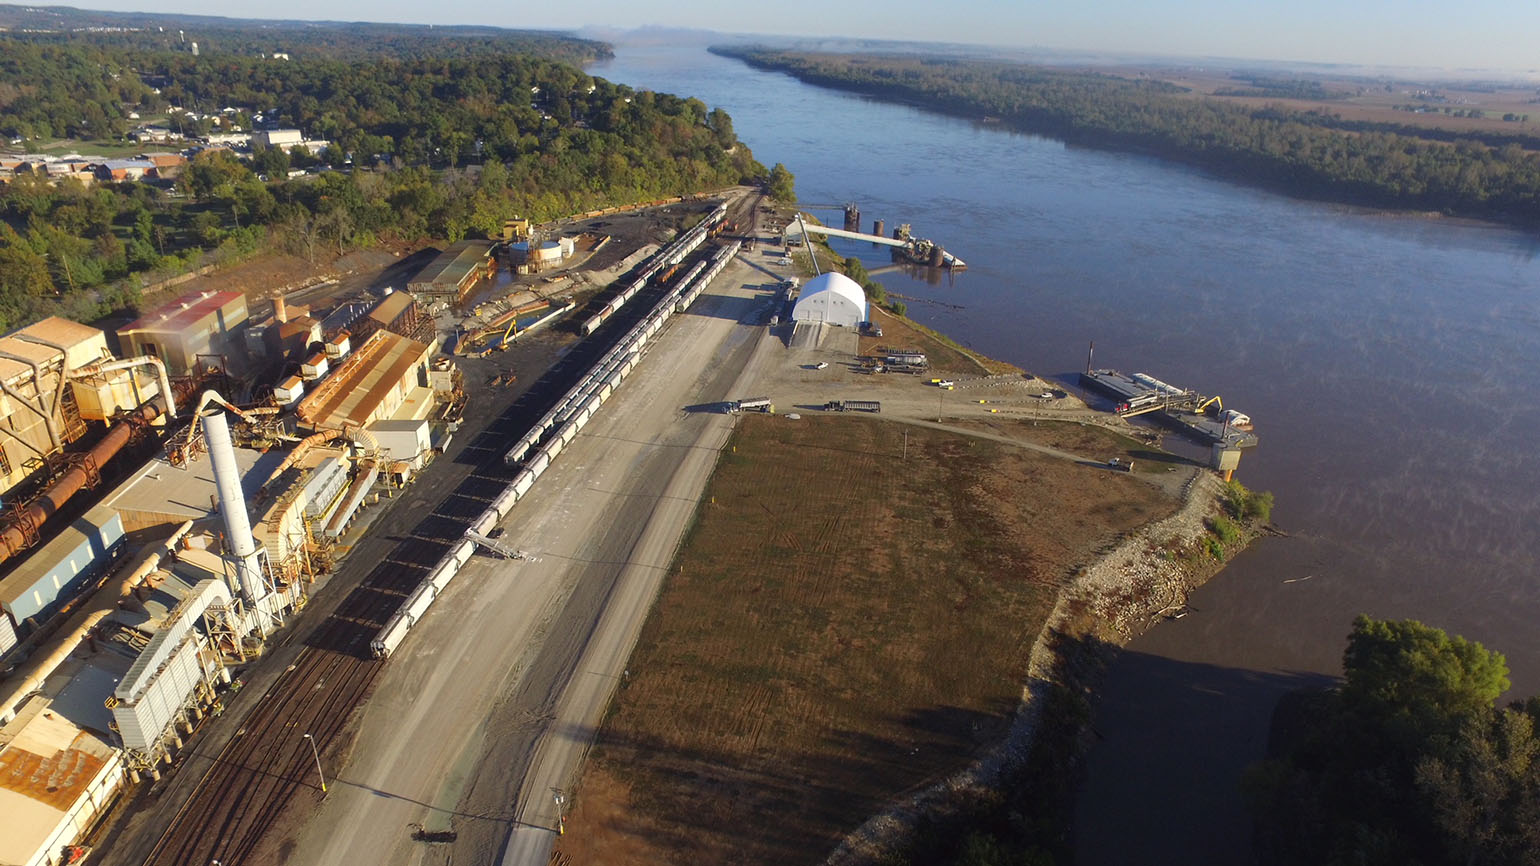 Aerial view of the remediation progress and new shipping port at the former Herculaneum, MO smelter site along Mississippi River.